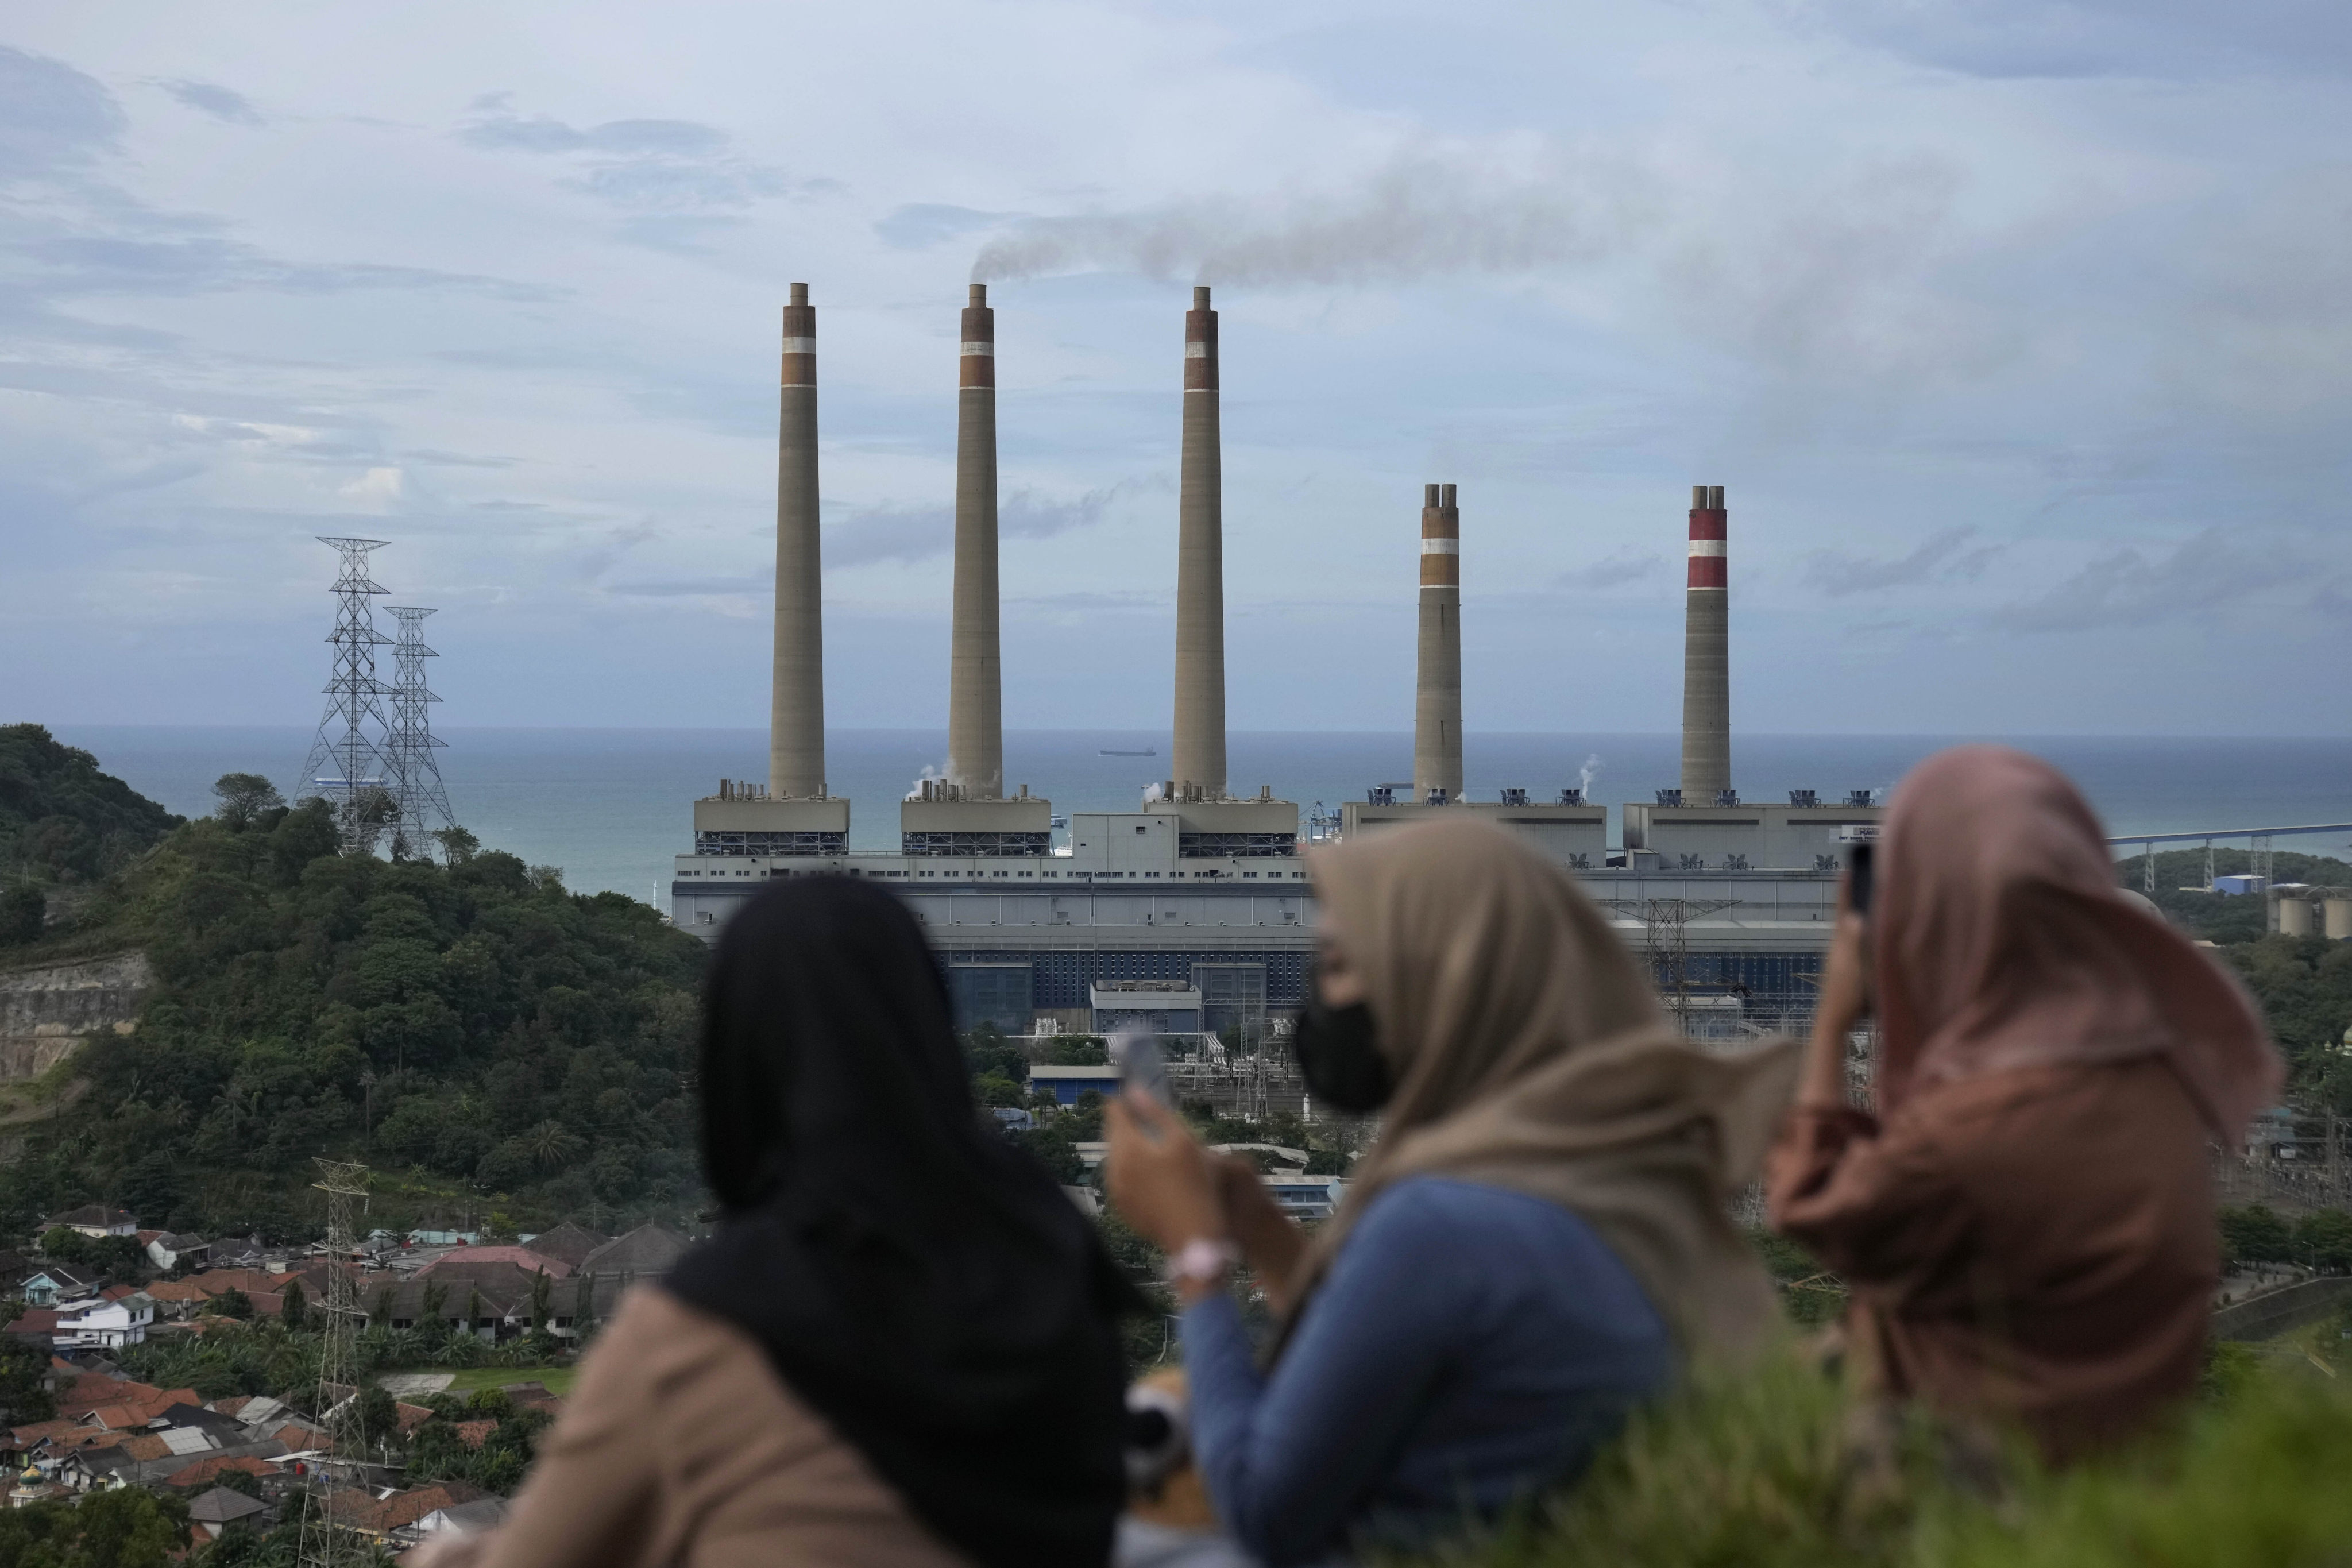 The Suralaya coal-fired power plant pictured from atop a hill in Cilegon, Indonesia. Photo: AP